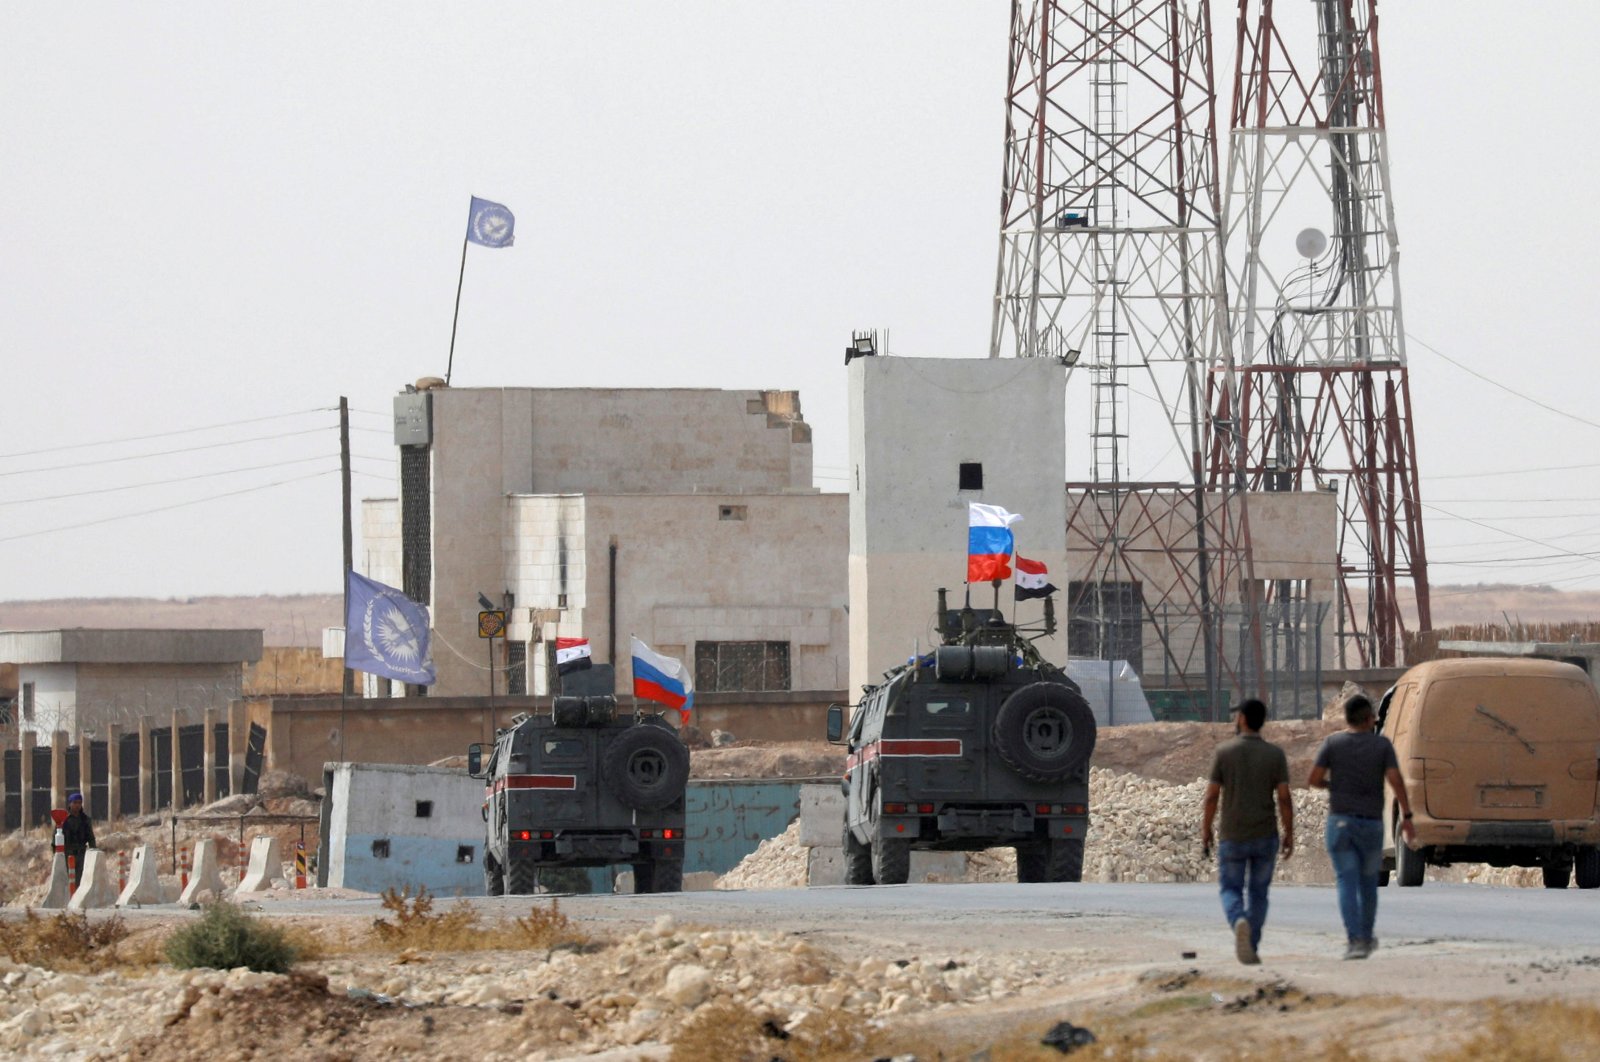 Russian and Syrian national flags flutter on military vehicles near Manbij, Syria, Oct. 15, 2019. REUTERS/Omar Sanadiki/File Photo